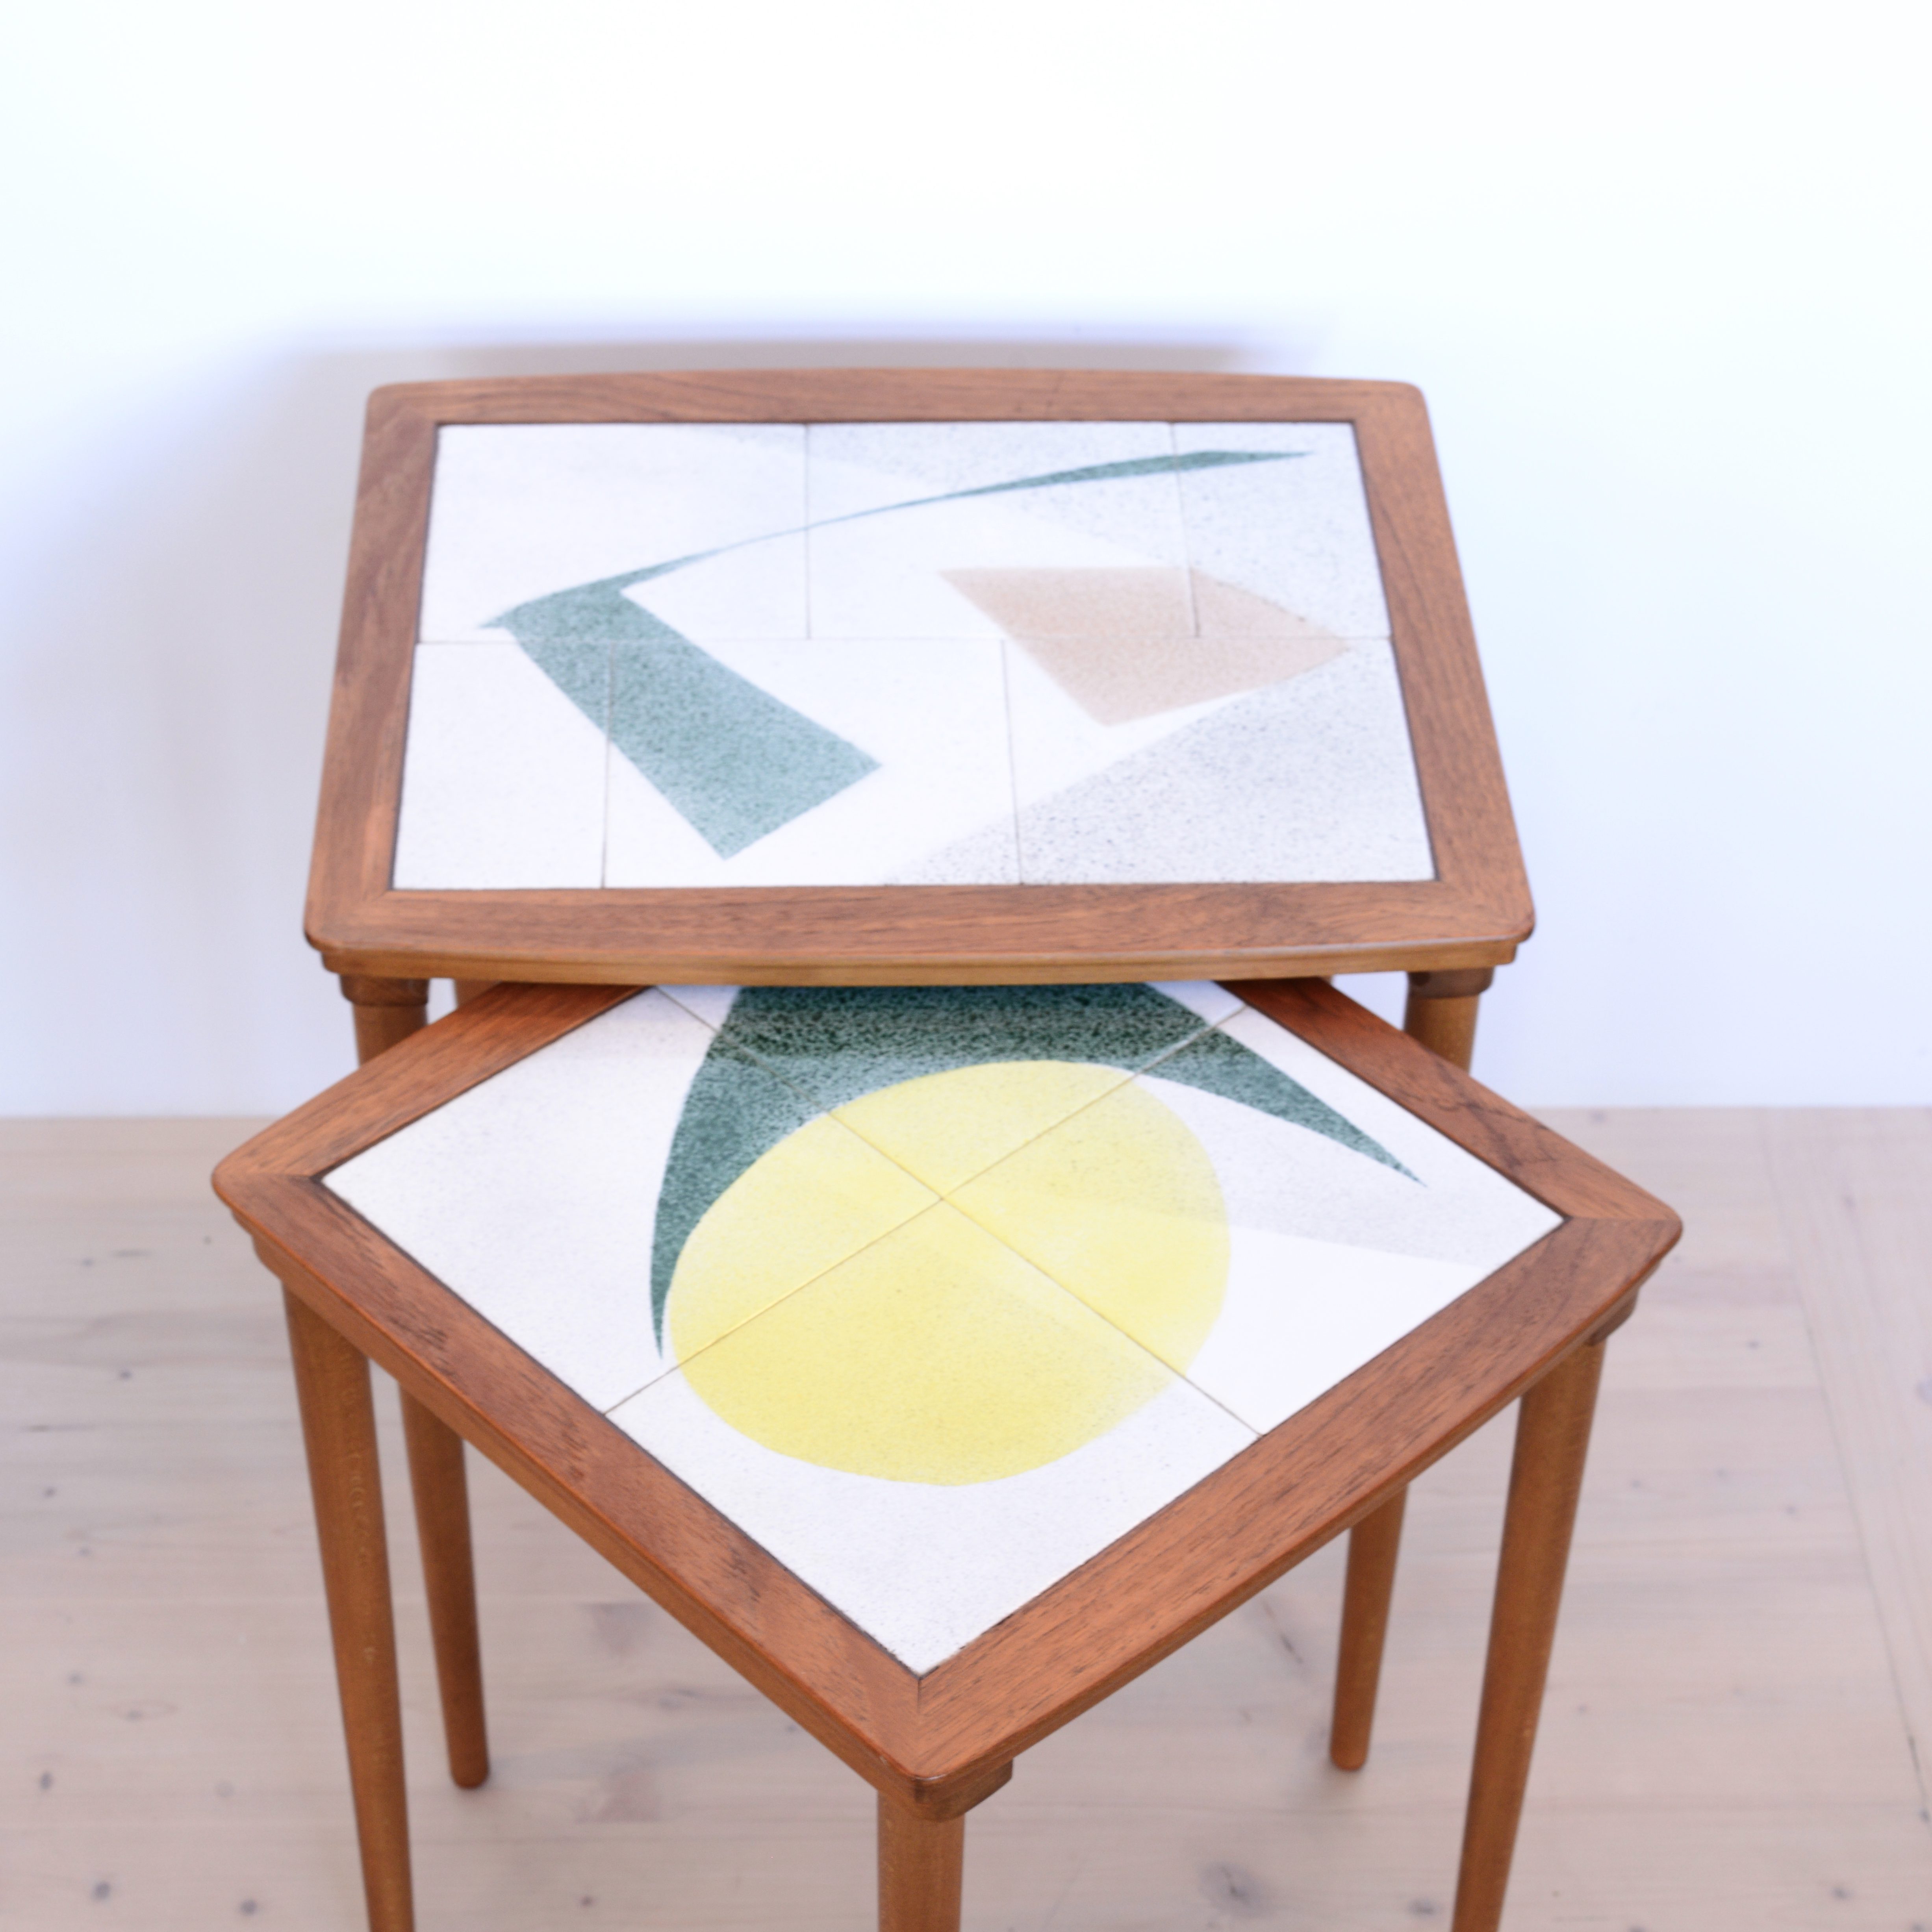 Nesting Table Duo with Tiled Surface heyday möbel Zürich